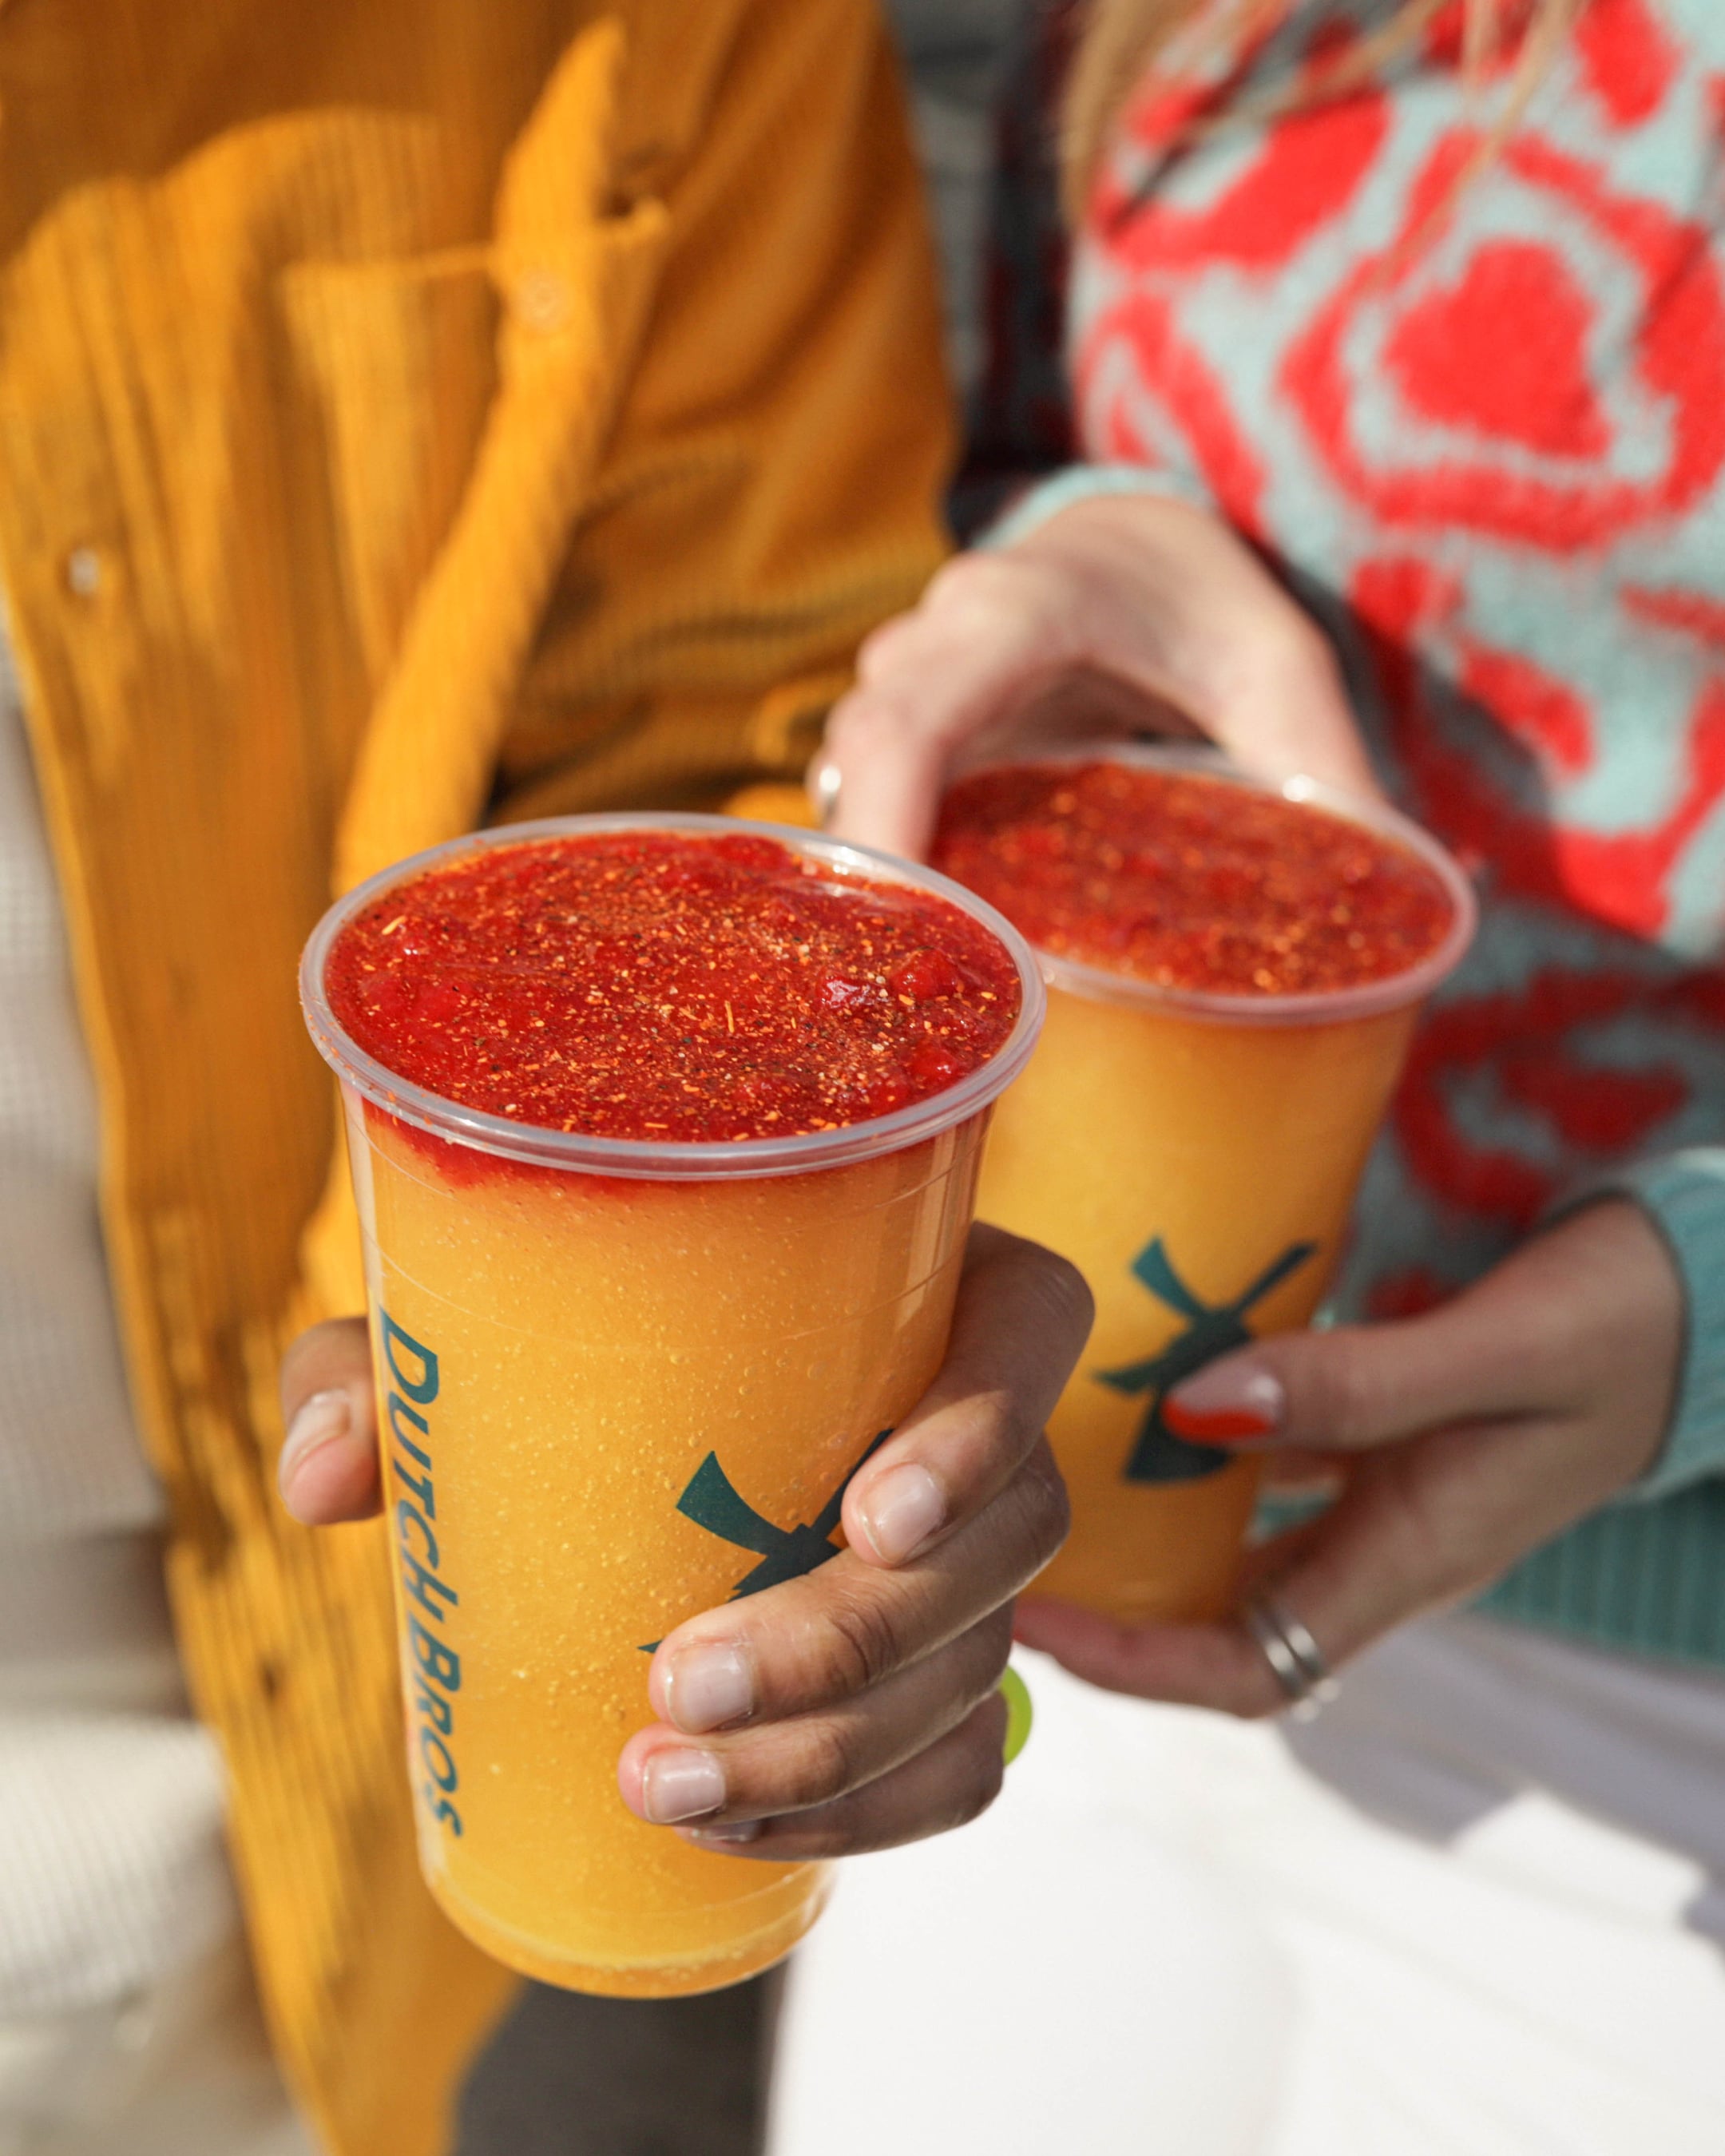 Tajín is a unique blend of 100% natural chili peppers, lime and sea salt. It’s the perfect addition to give any drink a slightly spicy touch.